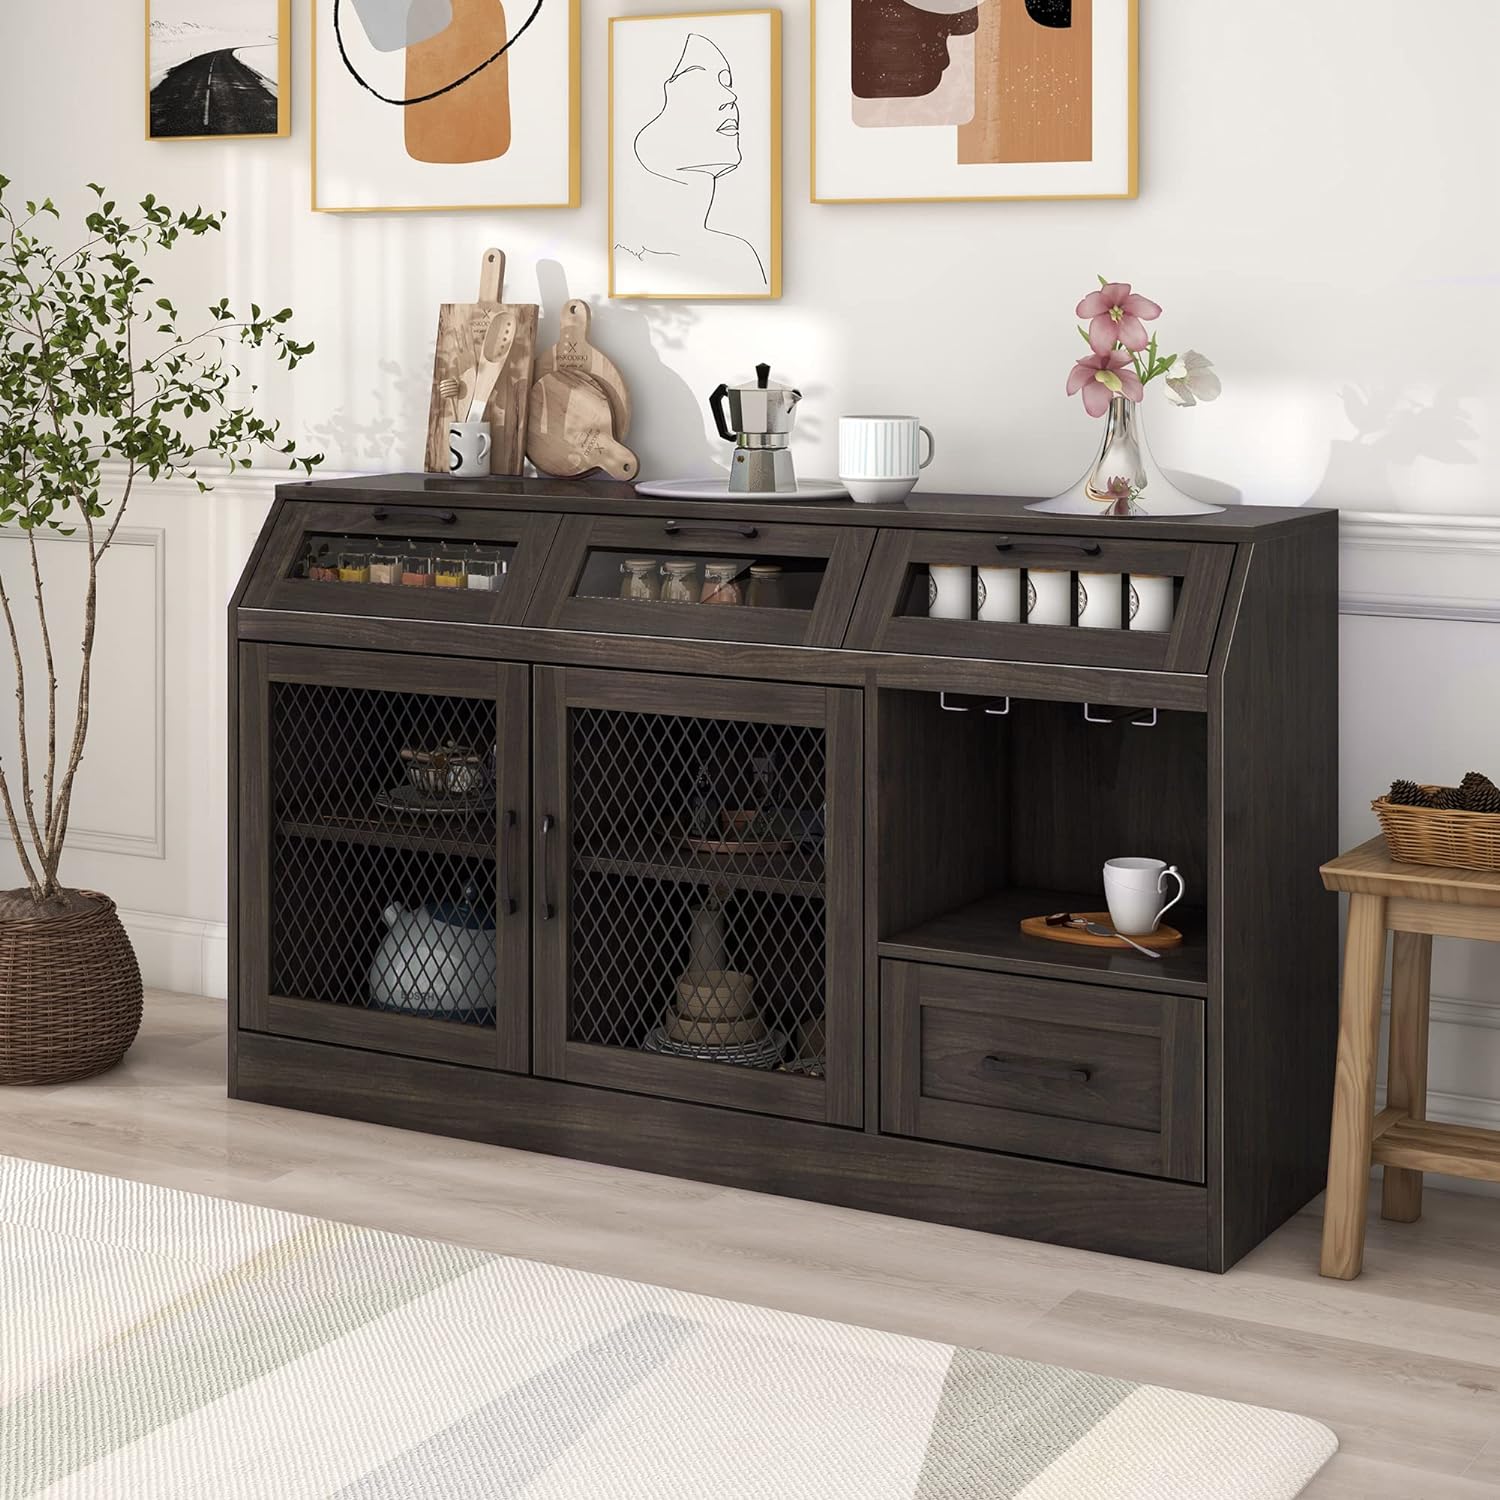 WILLIAMSPACE 54 Sideboard Buffet Cabinet, Kitchen Sideboard Multifunctional Buffet Cabinet with 4 Drawers, Mesh Metal Doors with Adjustable Shelves and Wineglass Holders - Espresso